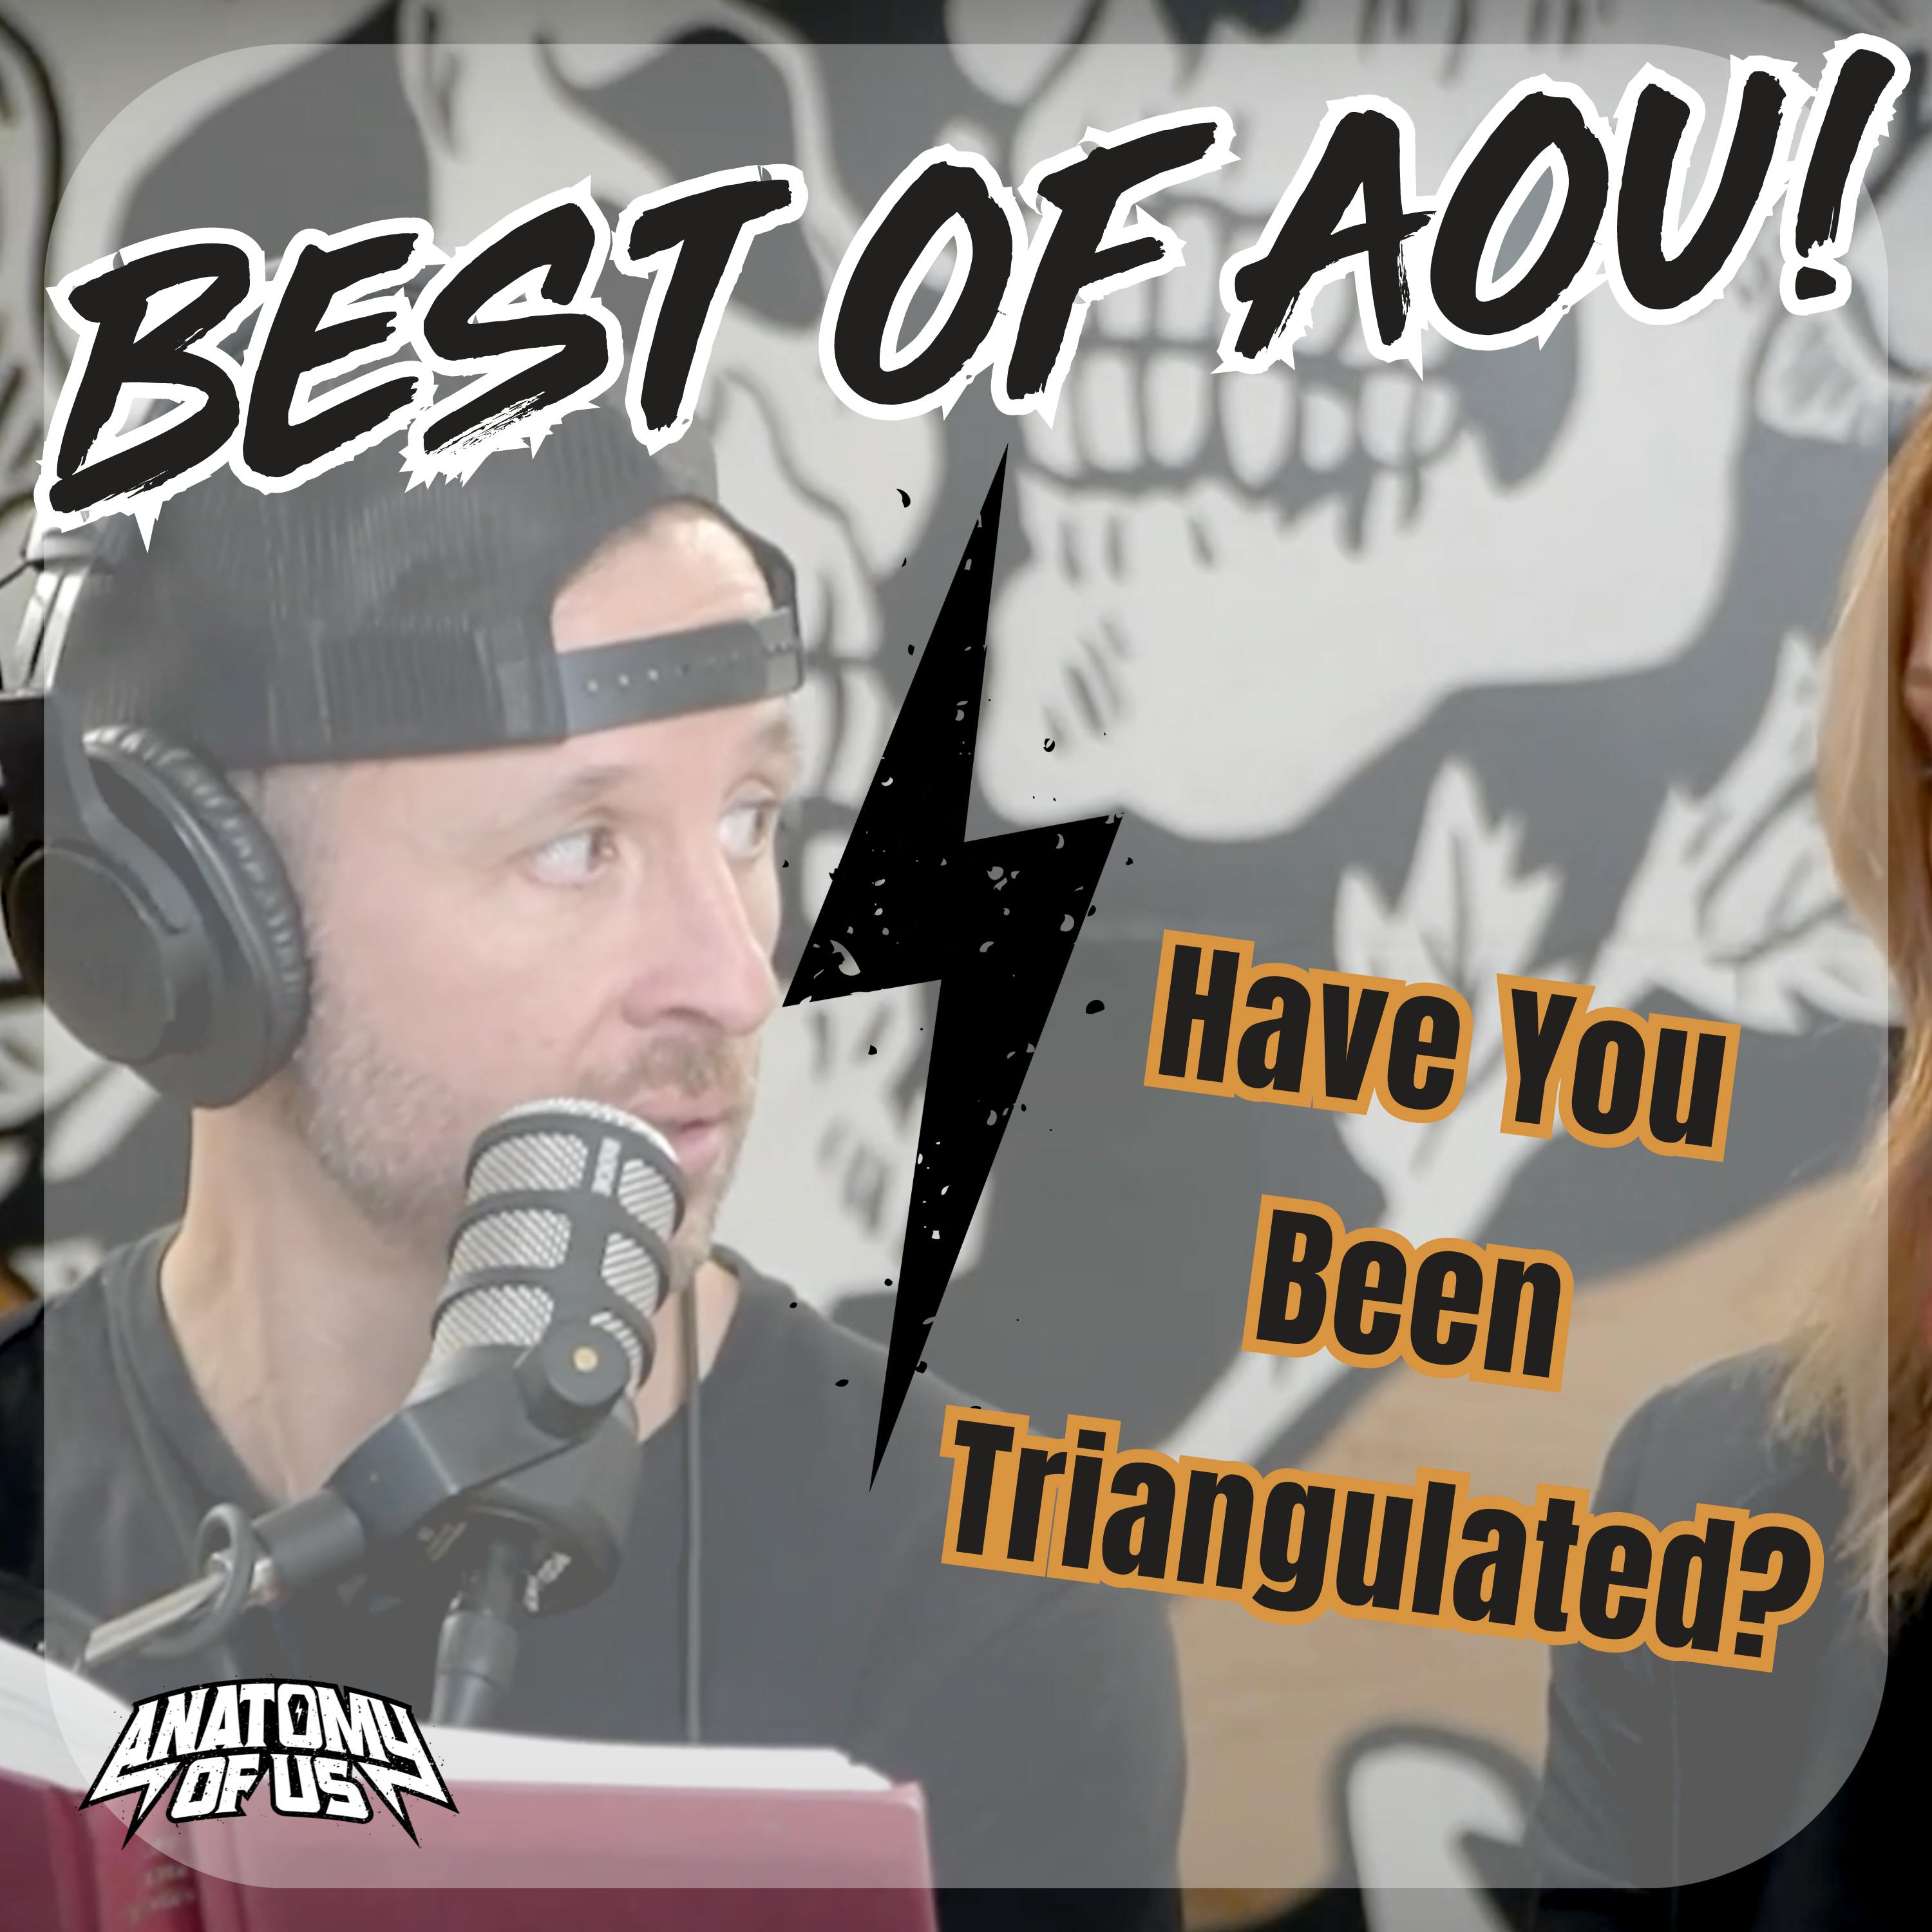 The Best Of AOU: Have You Been Triangulated?